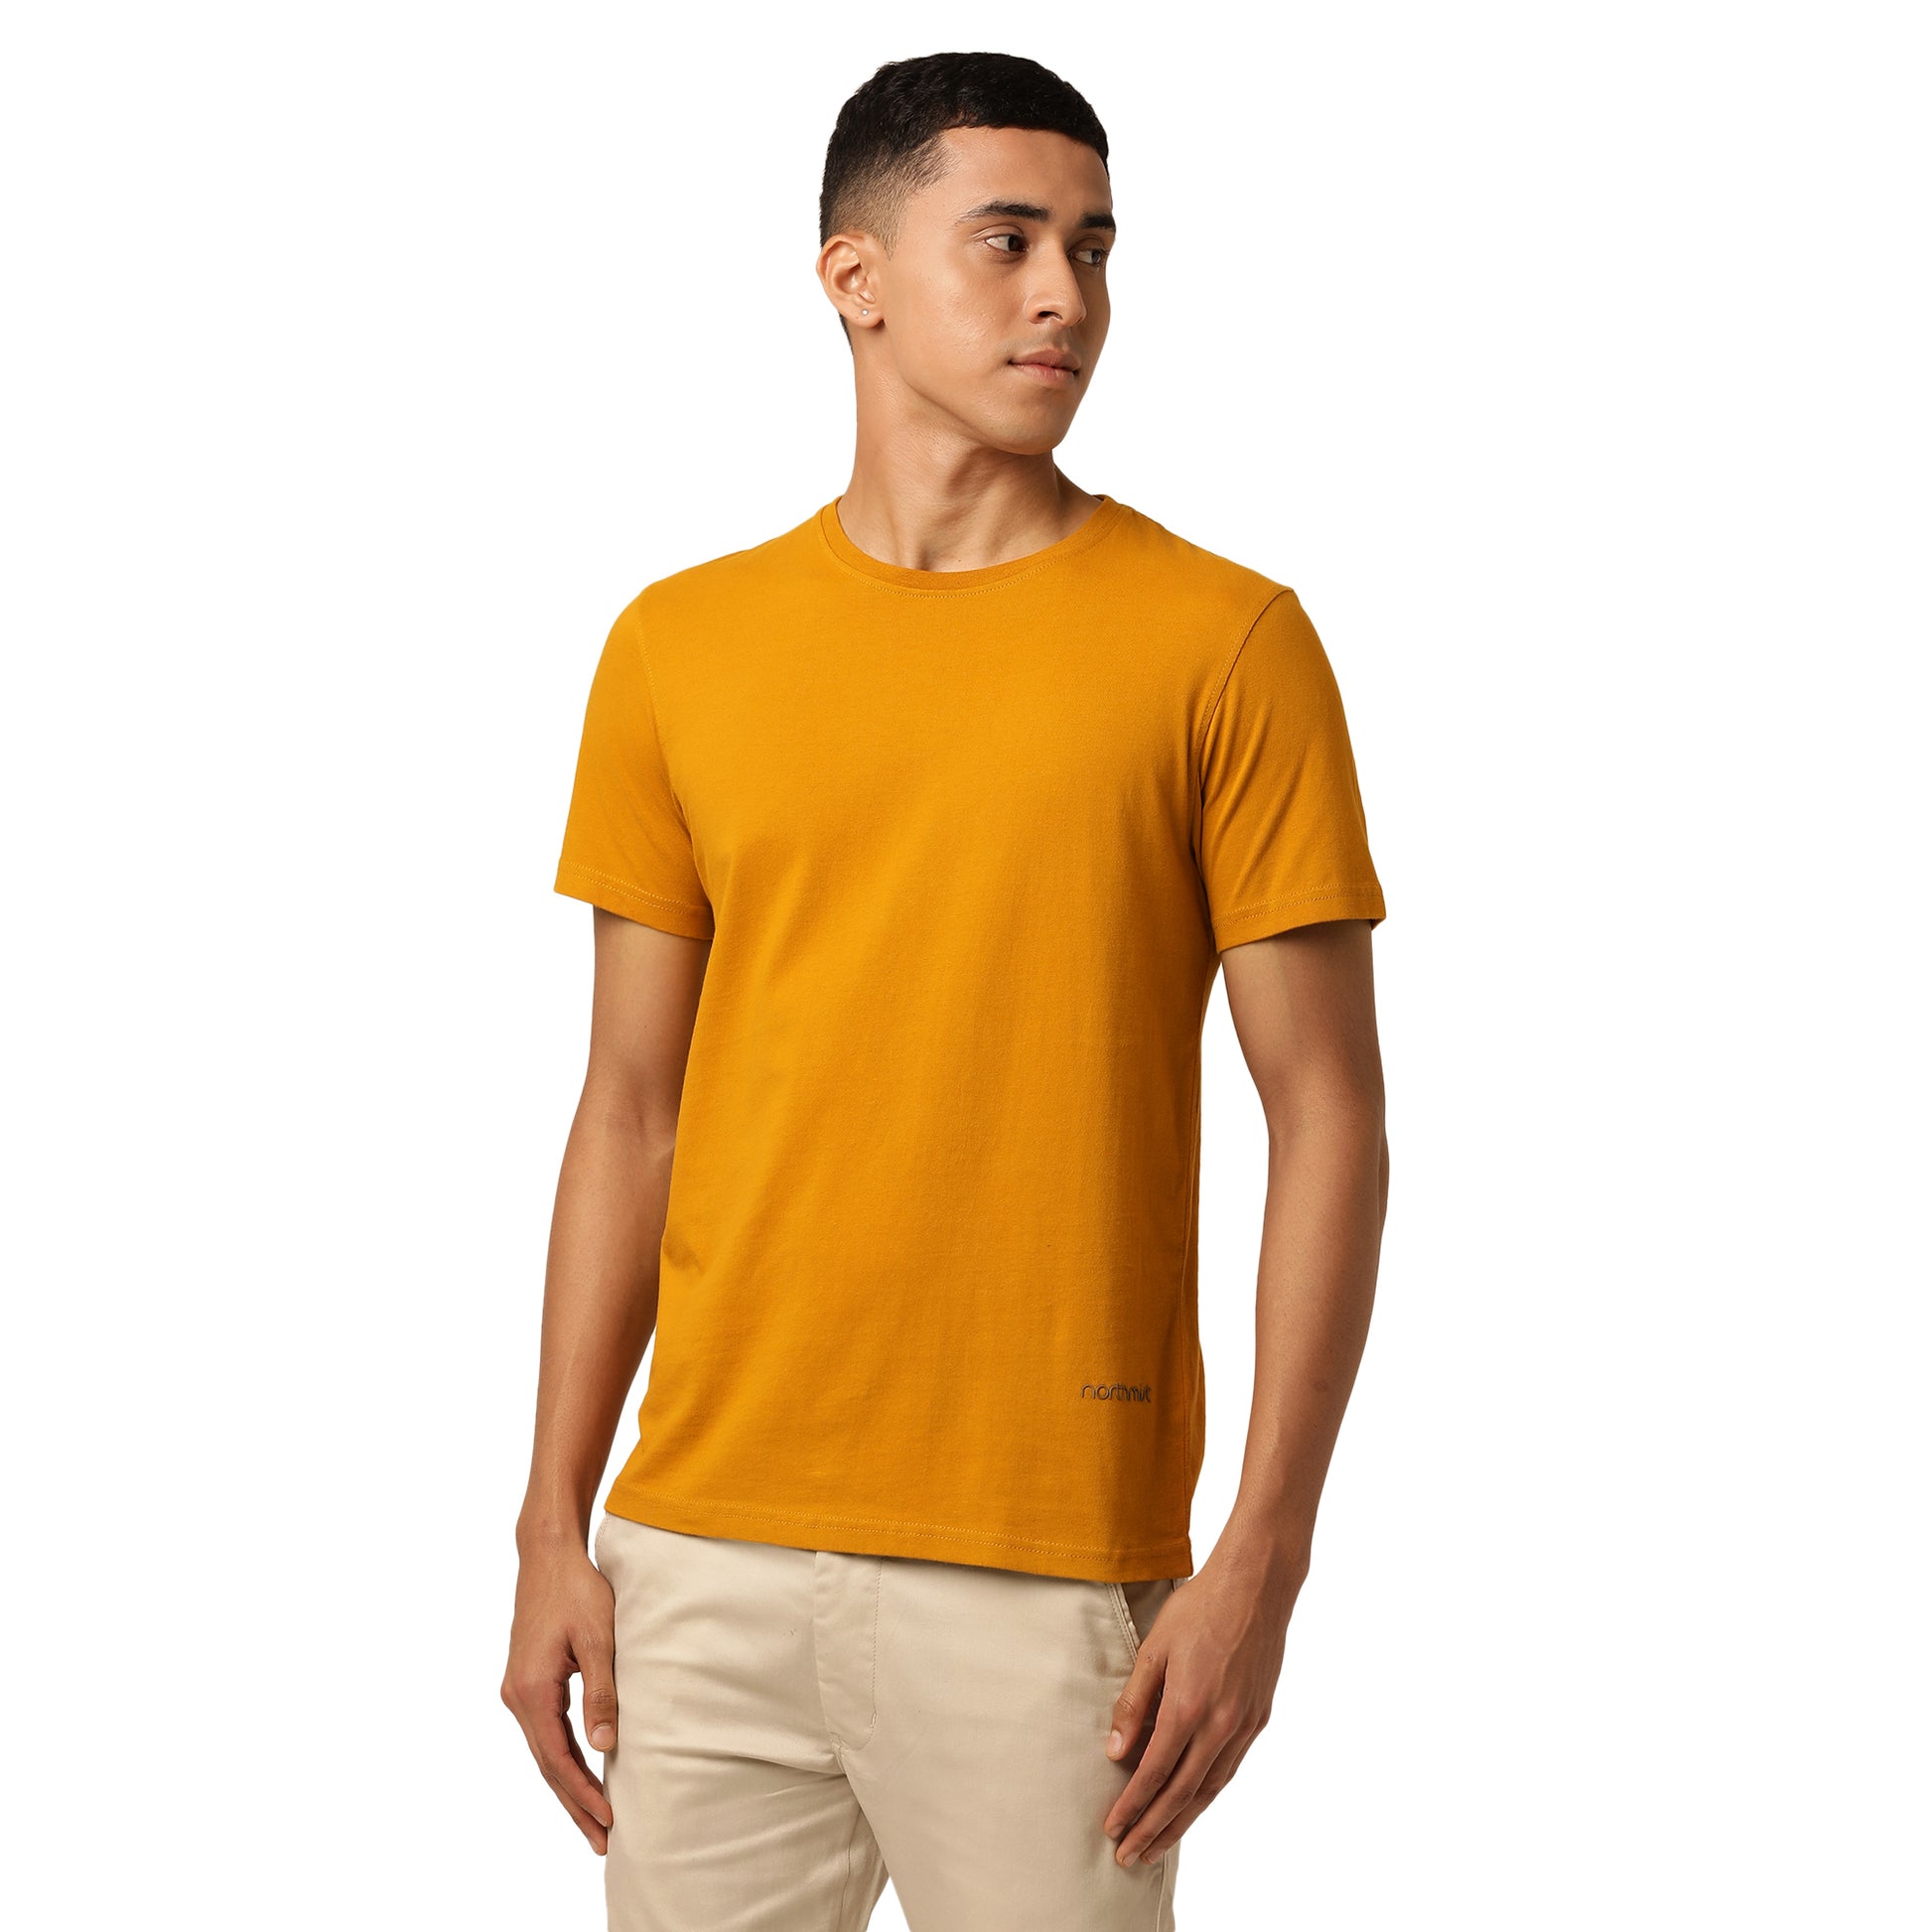 A stylish young man with short dark hair is standing and looking to his right. He is wearing a plain mustard yellow t-shirt made of comfortable organic cotton from the Amity Combo Pack: Organic Crew Neck T-shirts - Grey and Mustard by Northmist, and beige pants. The background is plain white, putting the focus entirely on the man and his outfit.